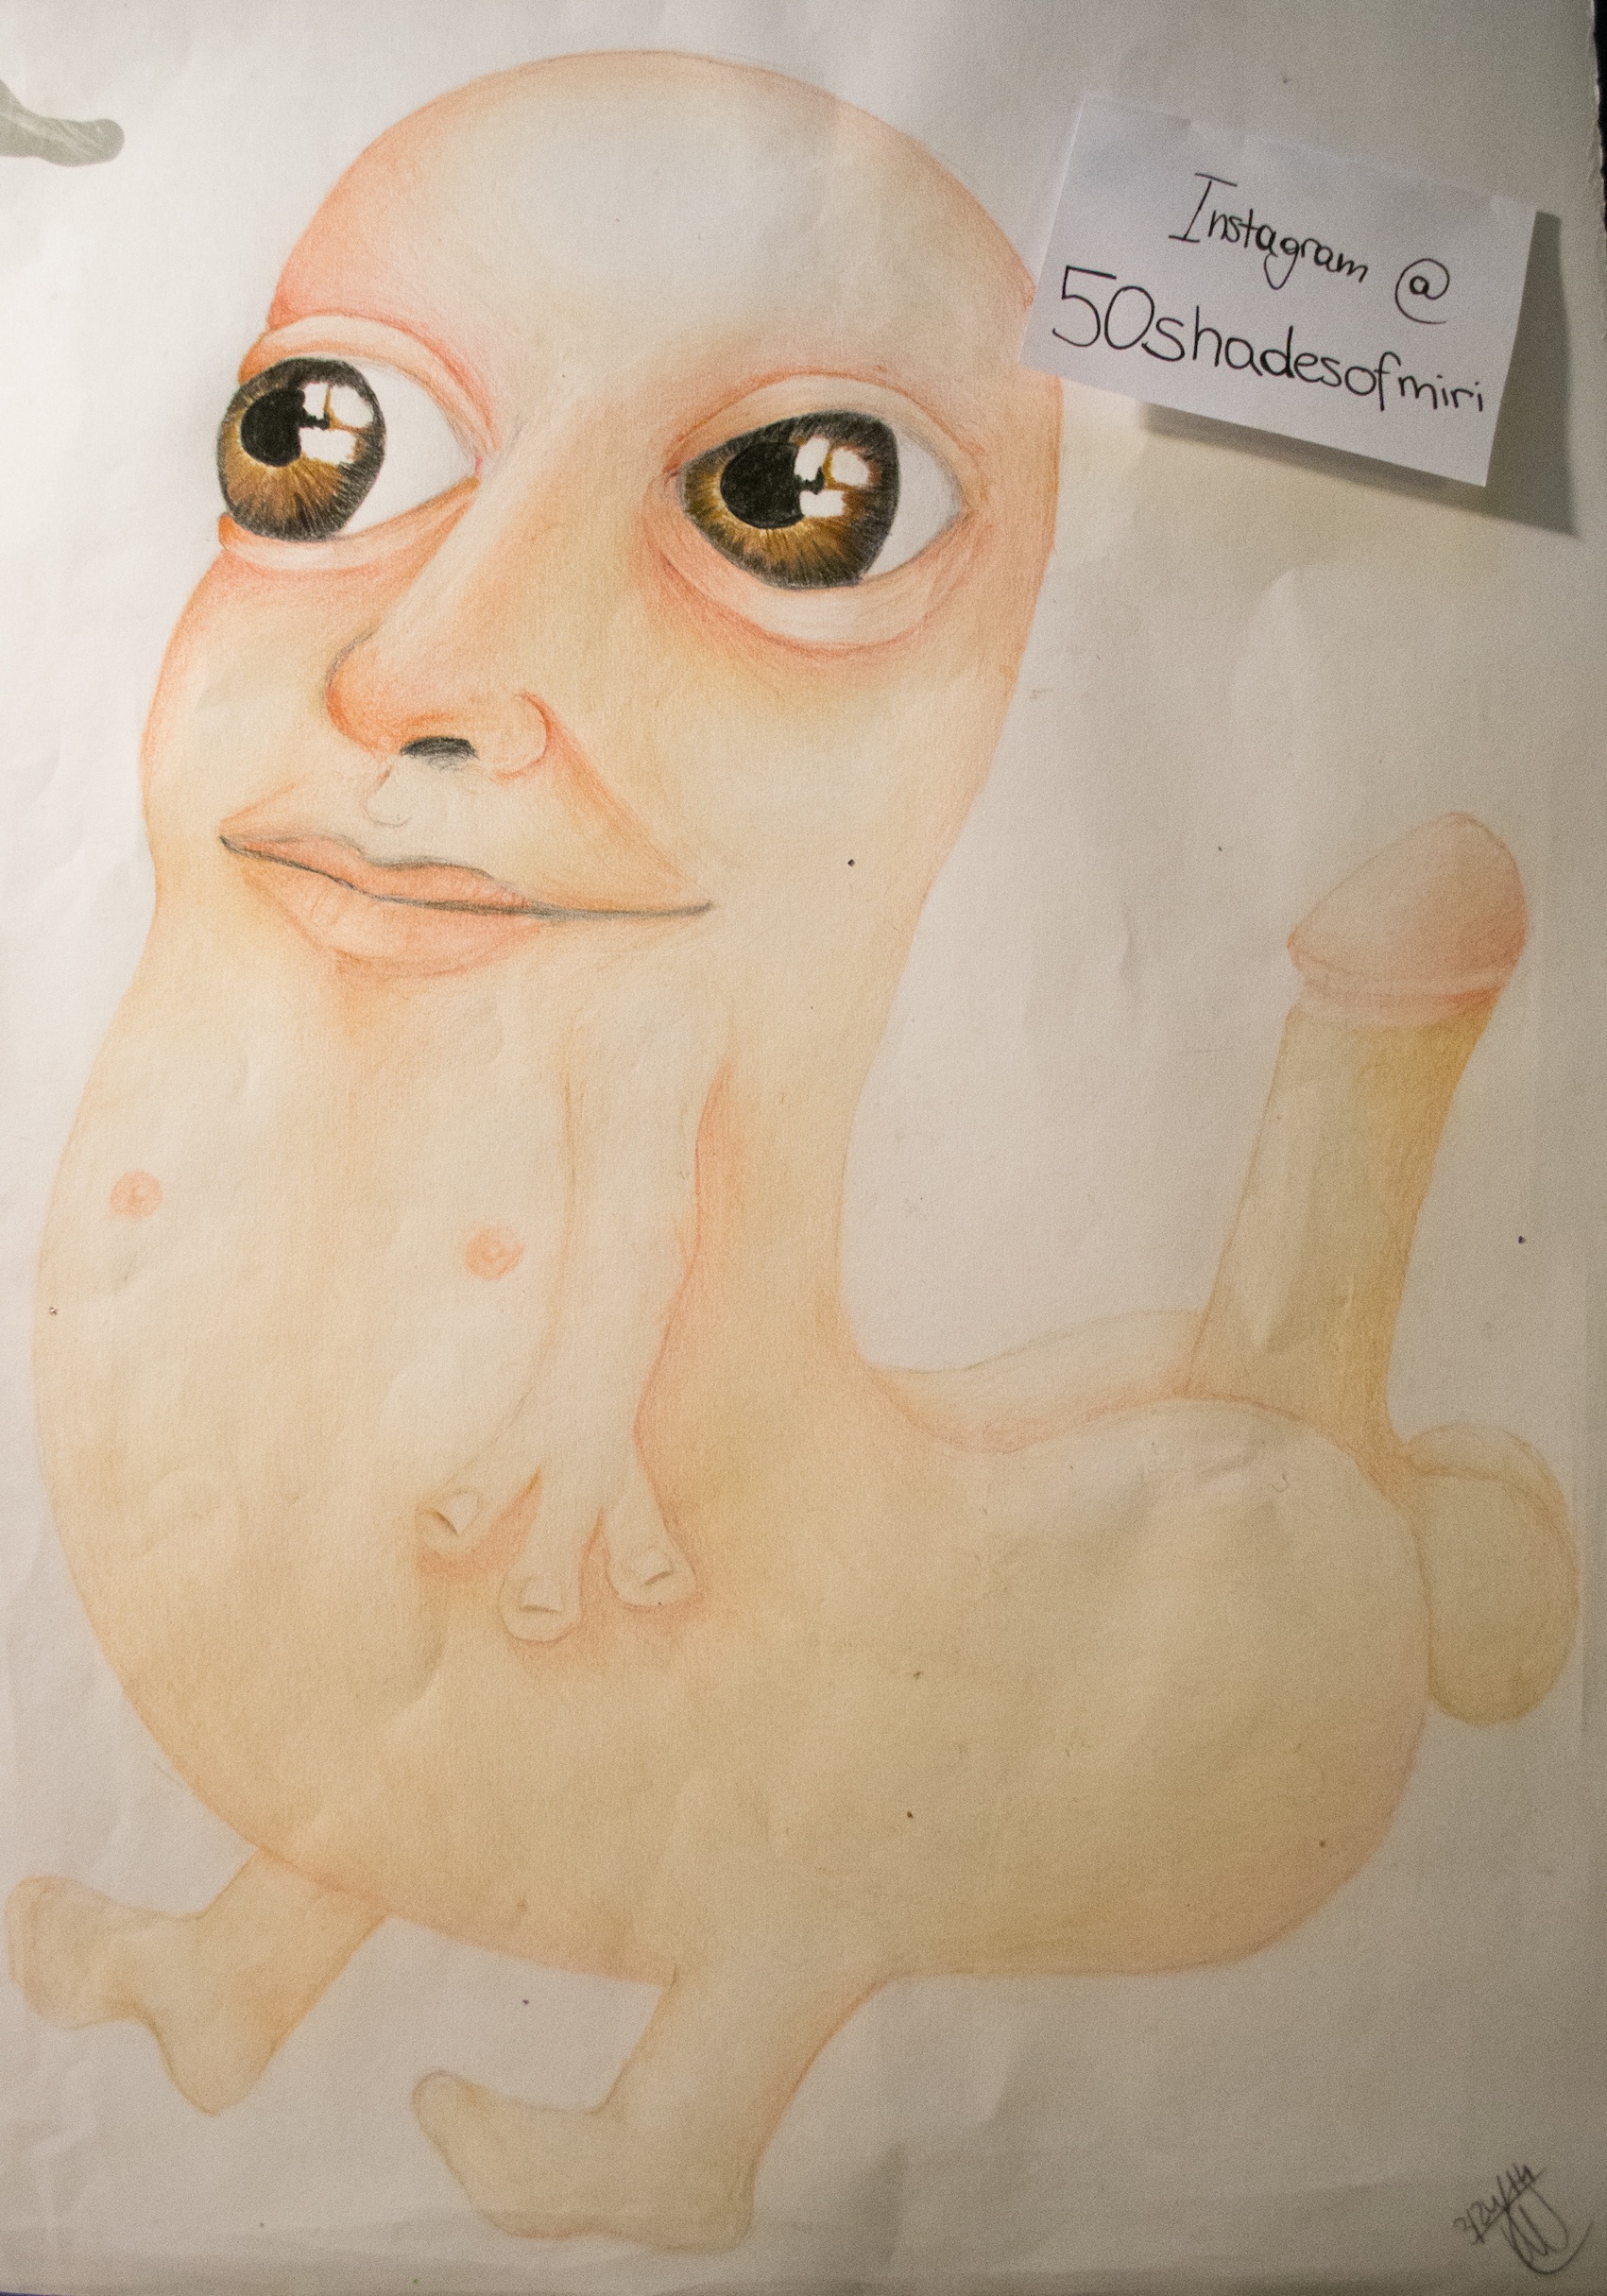 My sister drew a realistic version of dickbutt